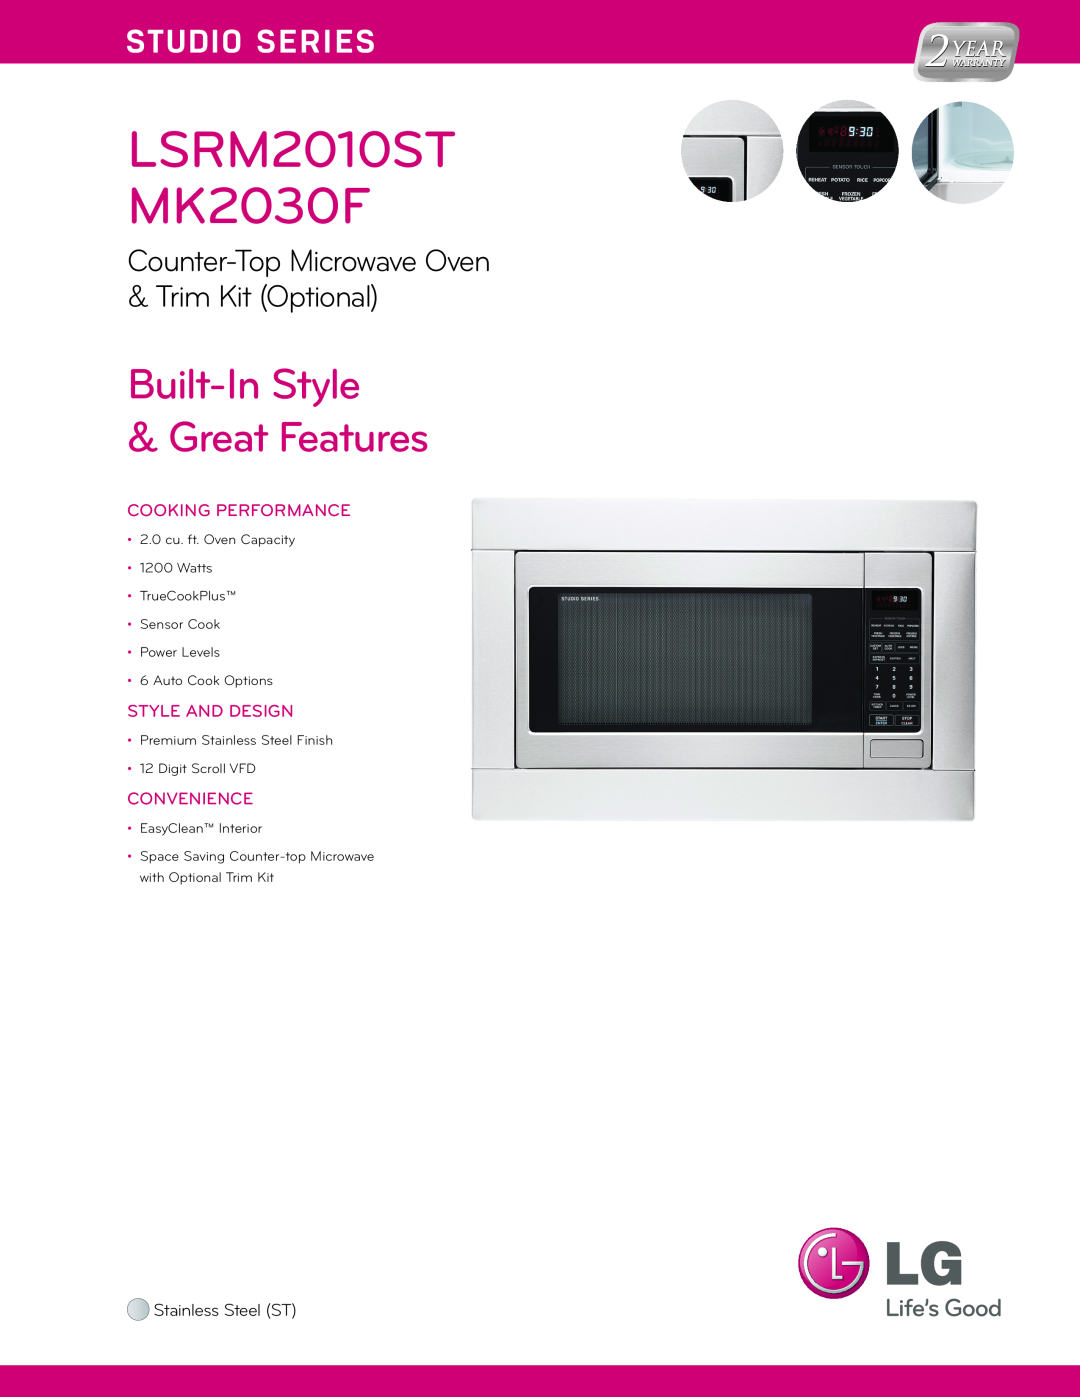 LG Electronics manual LSRM2010ST MK2030F, Cooking Performance, Style And Design, Convenience, Stainless Steel ST 